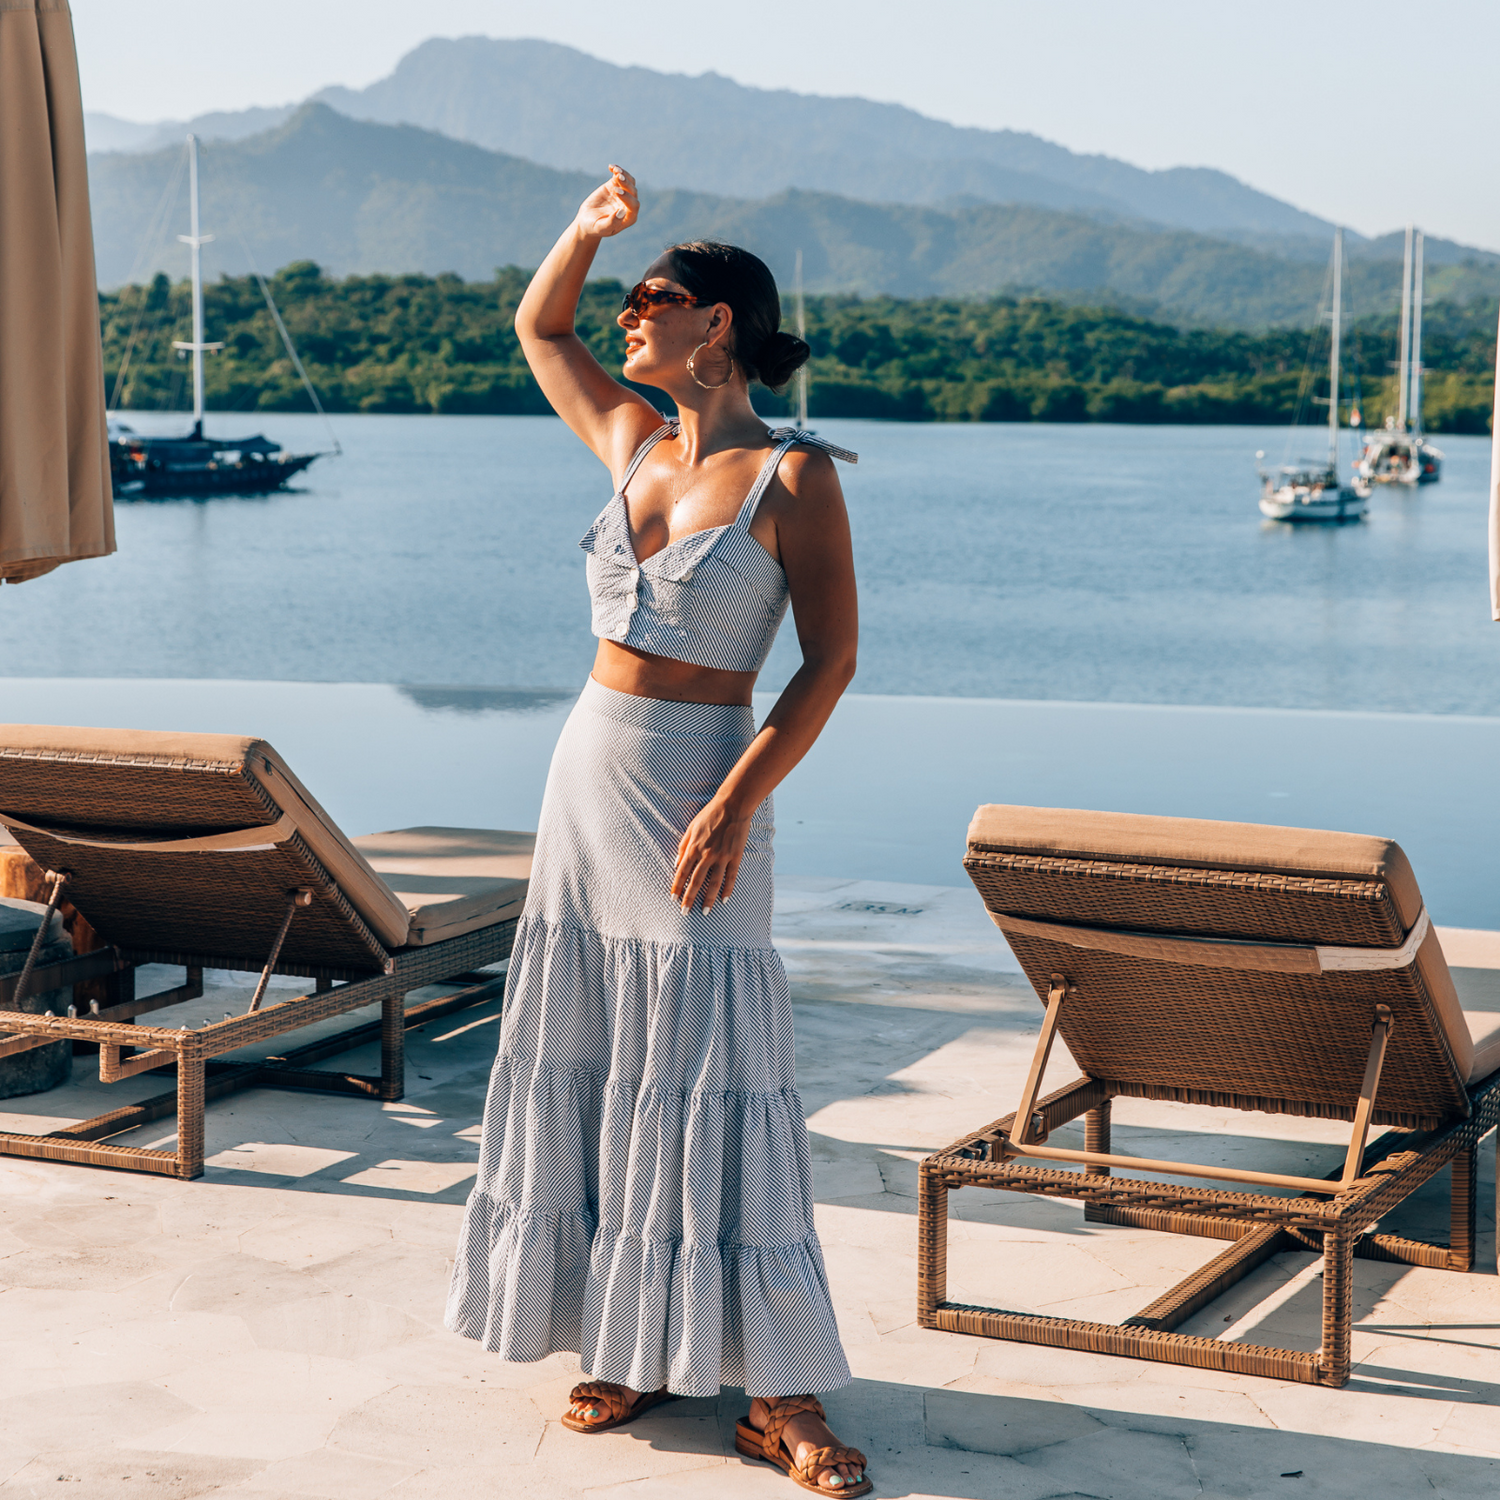 Woman standing in front of infinity pool with deck chairs and ocean in the background dotted with sailing boats and framed by green hill and mountains.  She is wearing a tiered maxi skirt and crop top in blue and white stripes, she has a hand raised to block the sun from her eyes